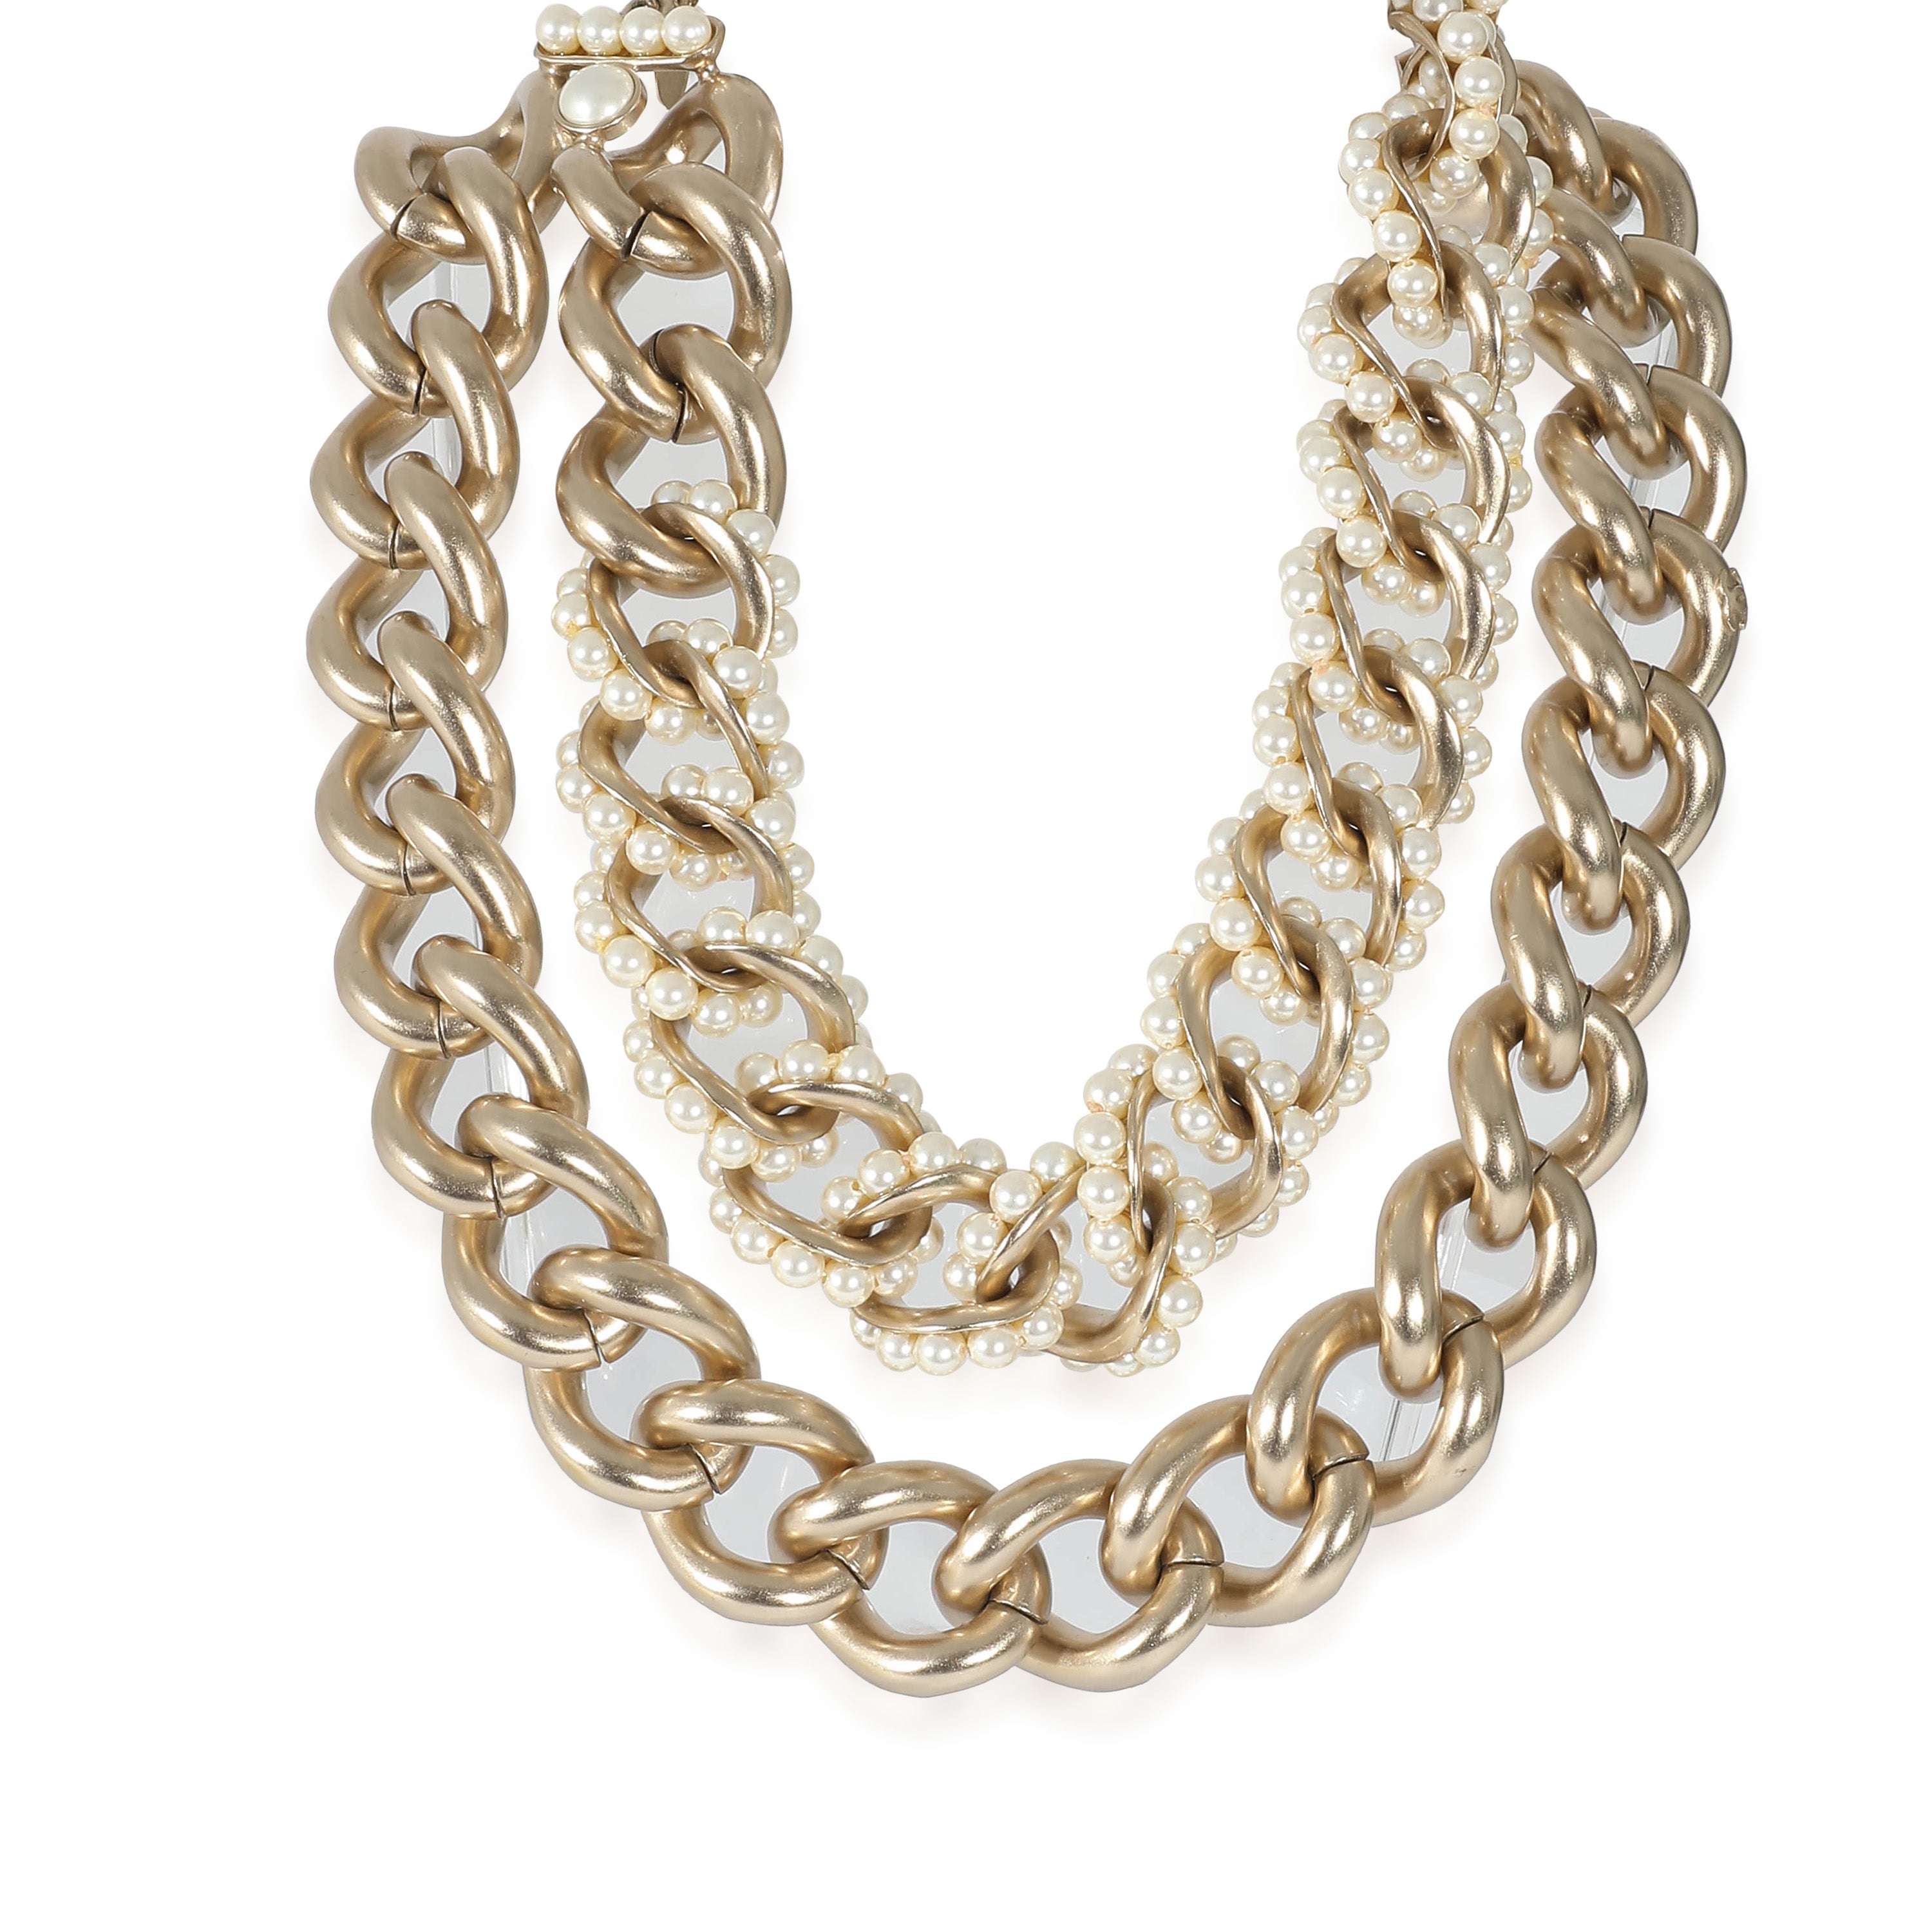 1970's Chanel Rhinestone and Pearl Bow Necklace - Ruby Lane